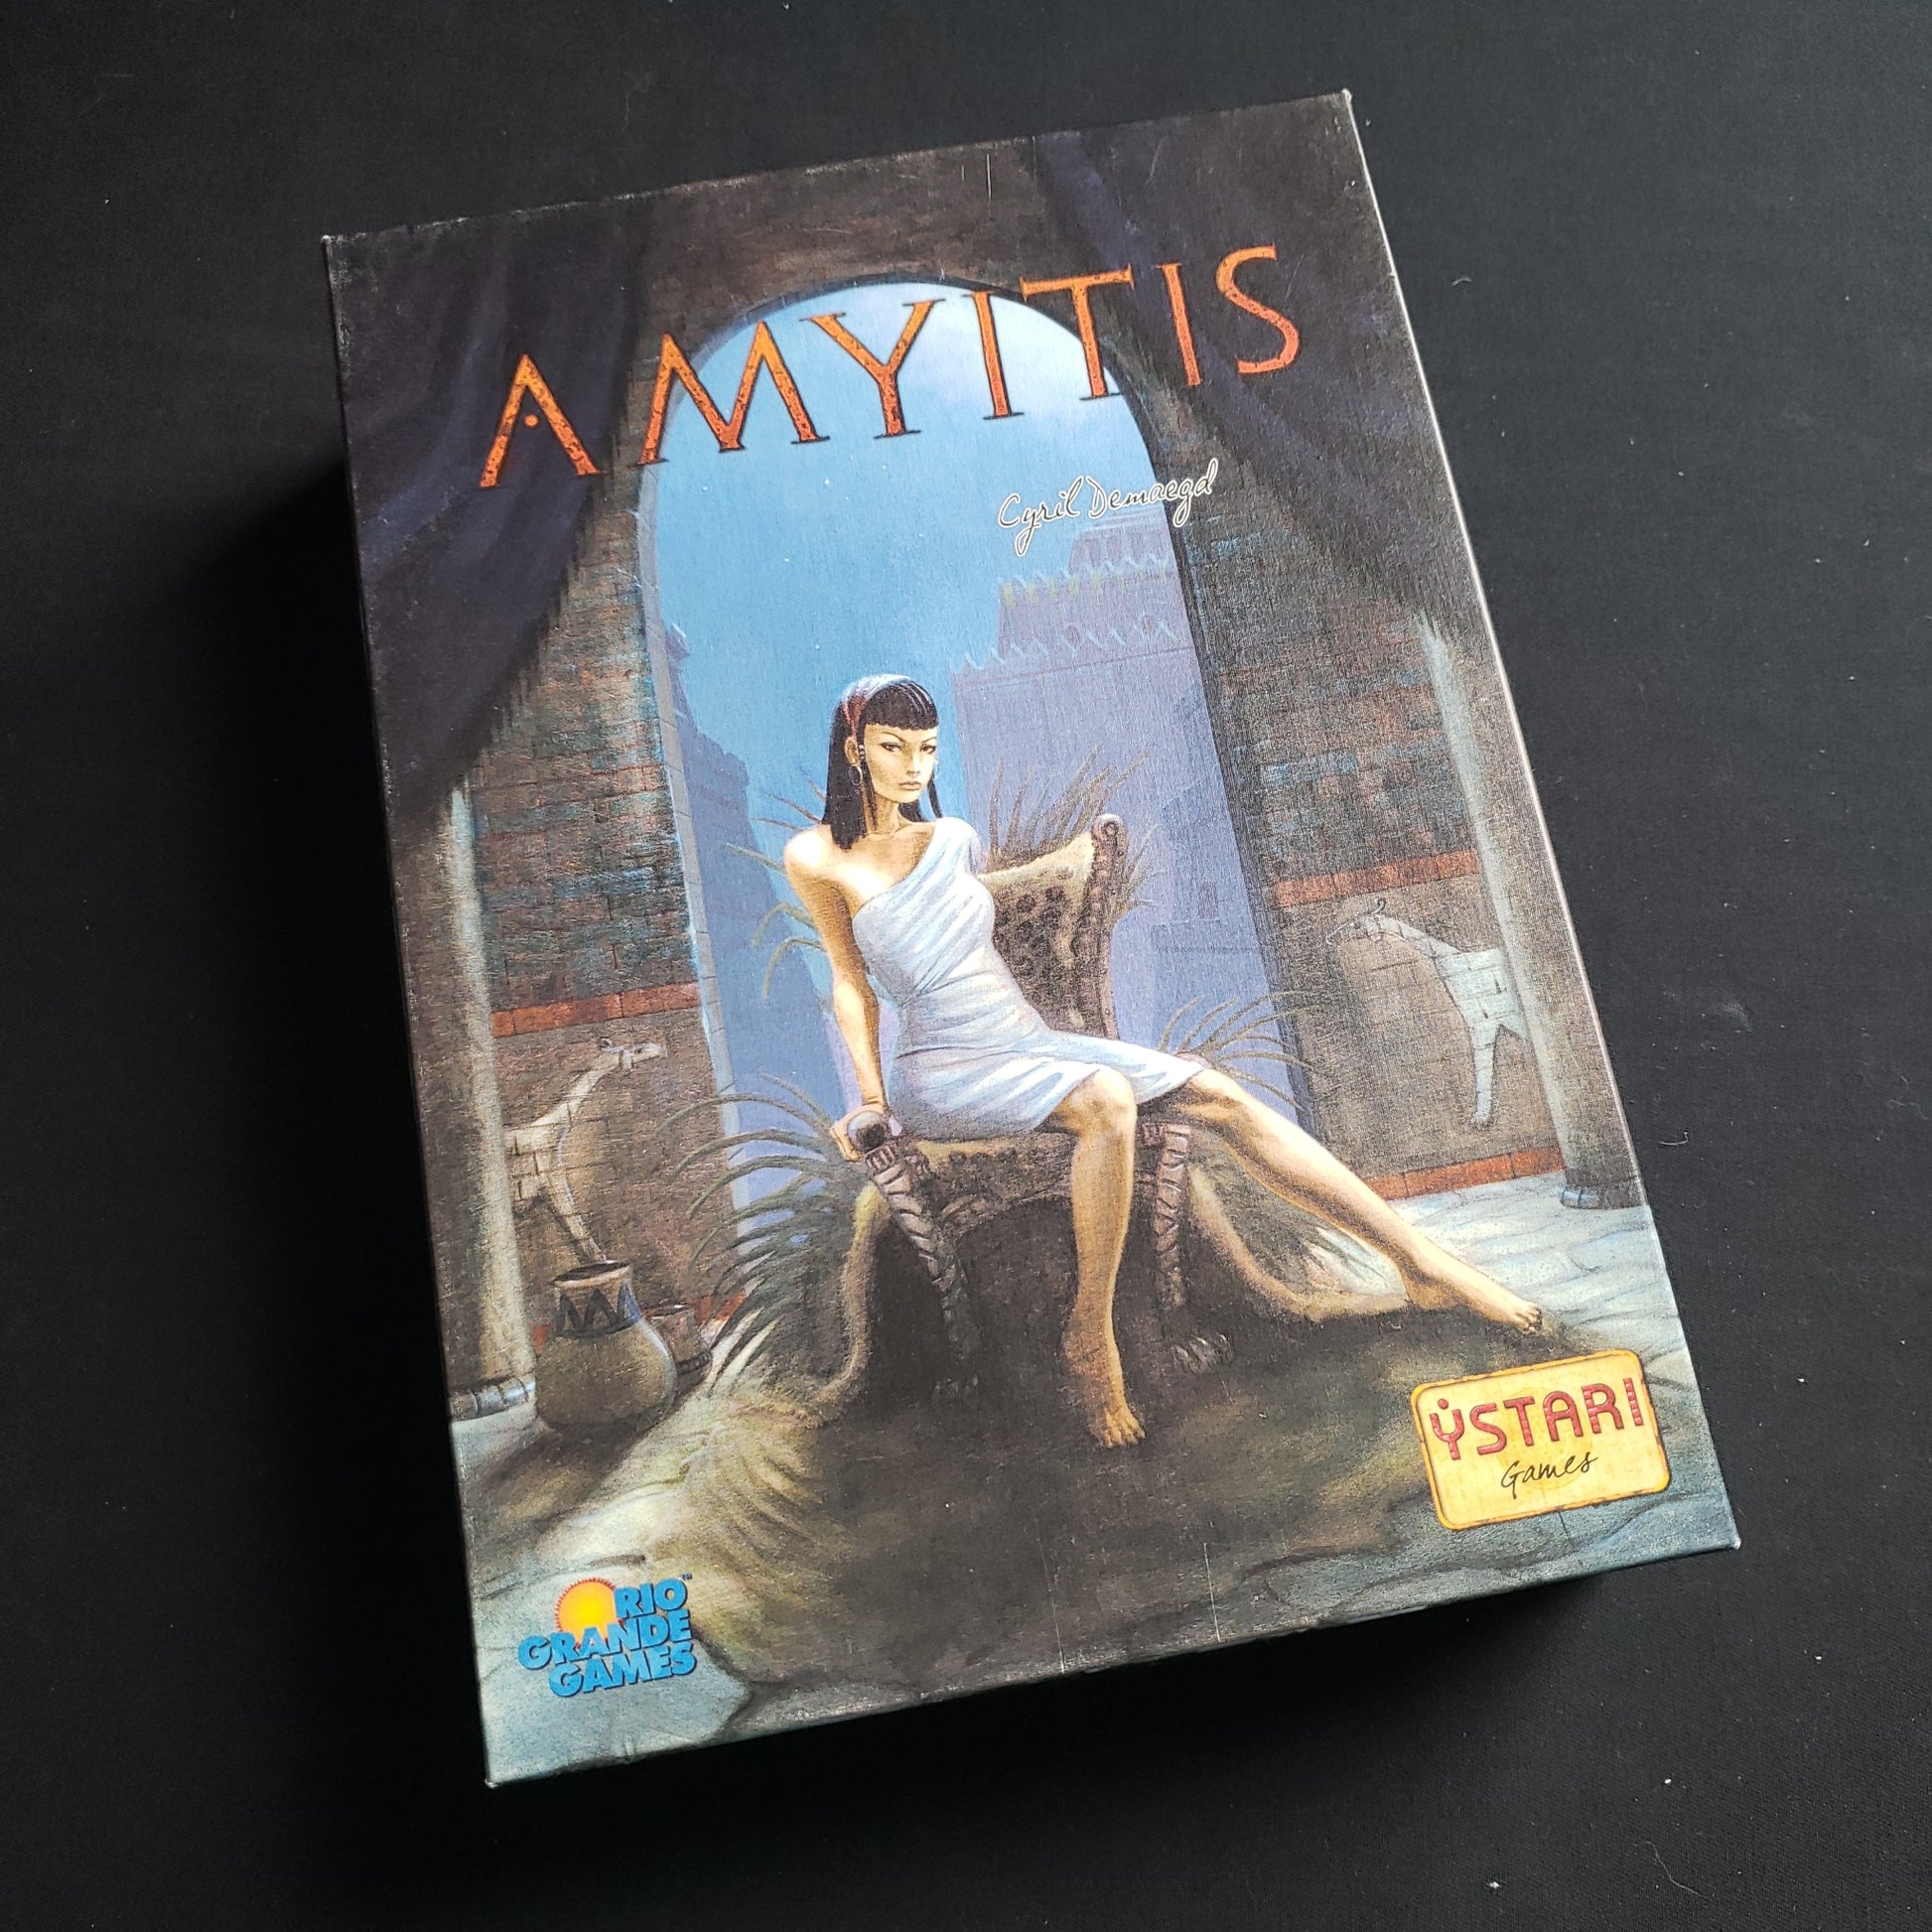 Image shows the front cover of the box of the Amyitis board game